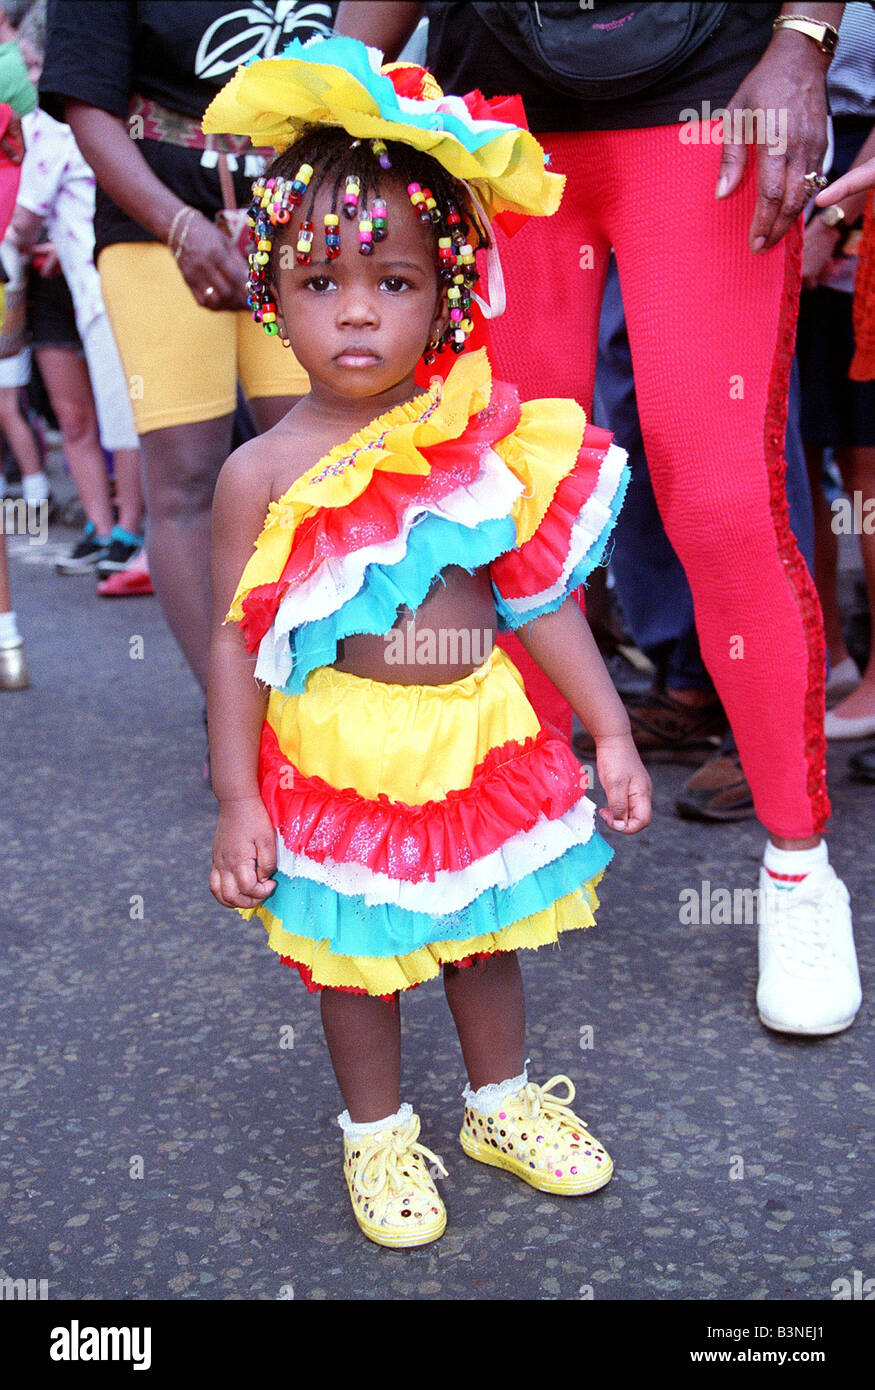 Child in costume at Notting hill carnival Stock Photo